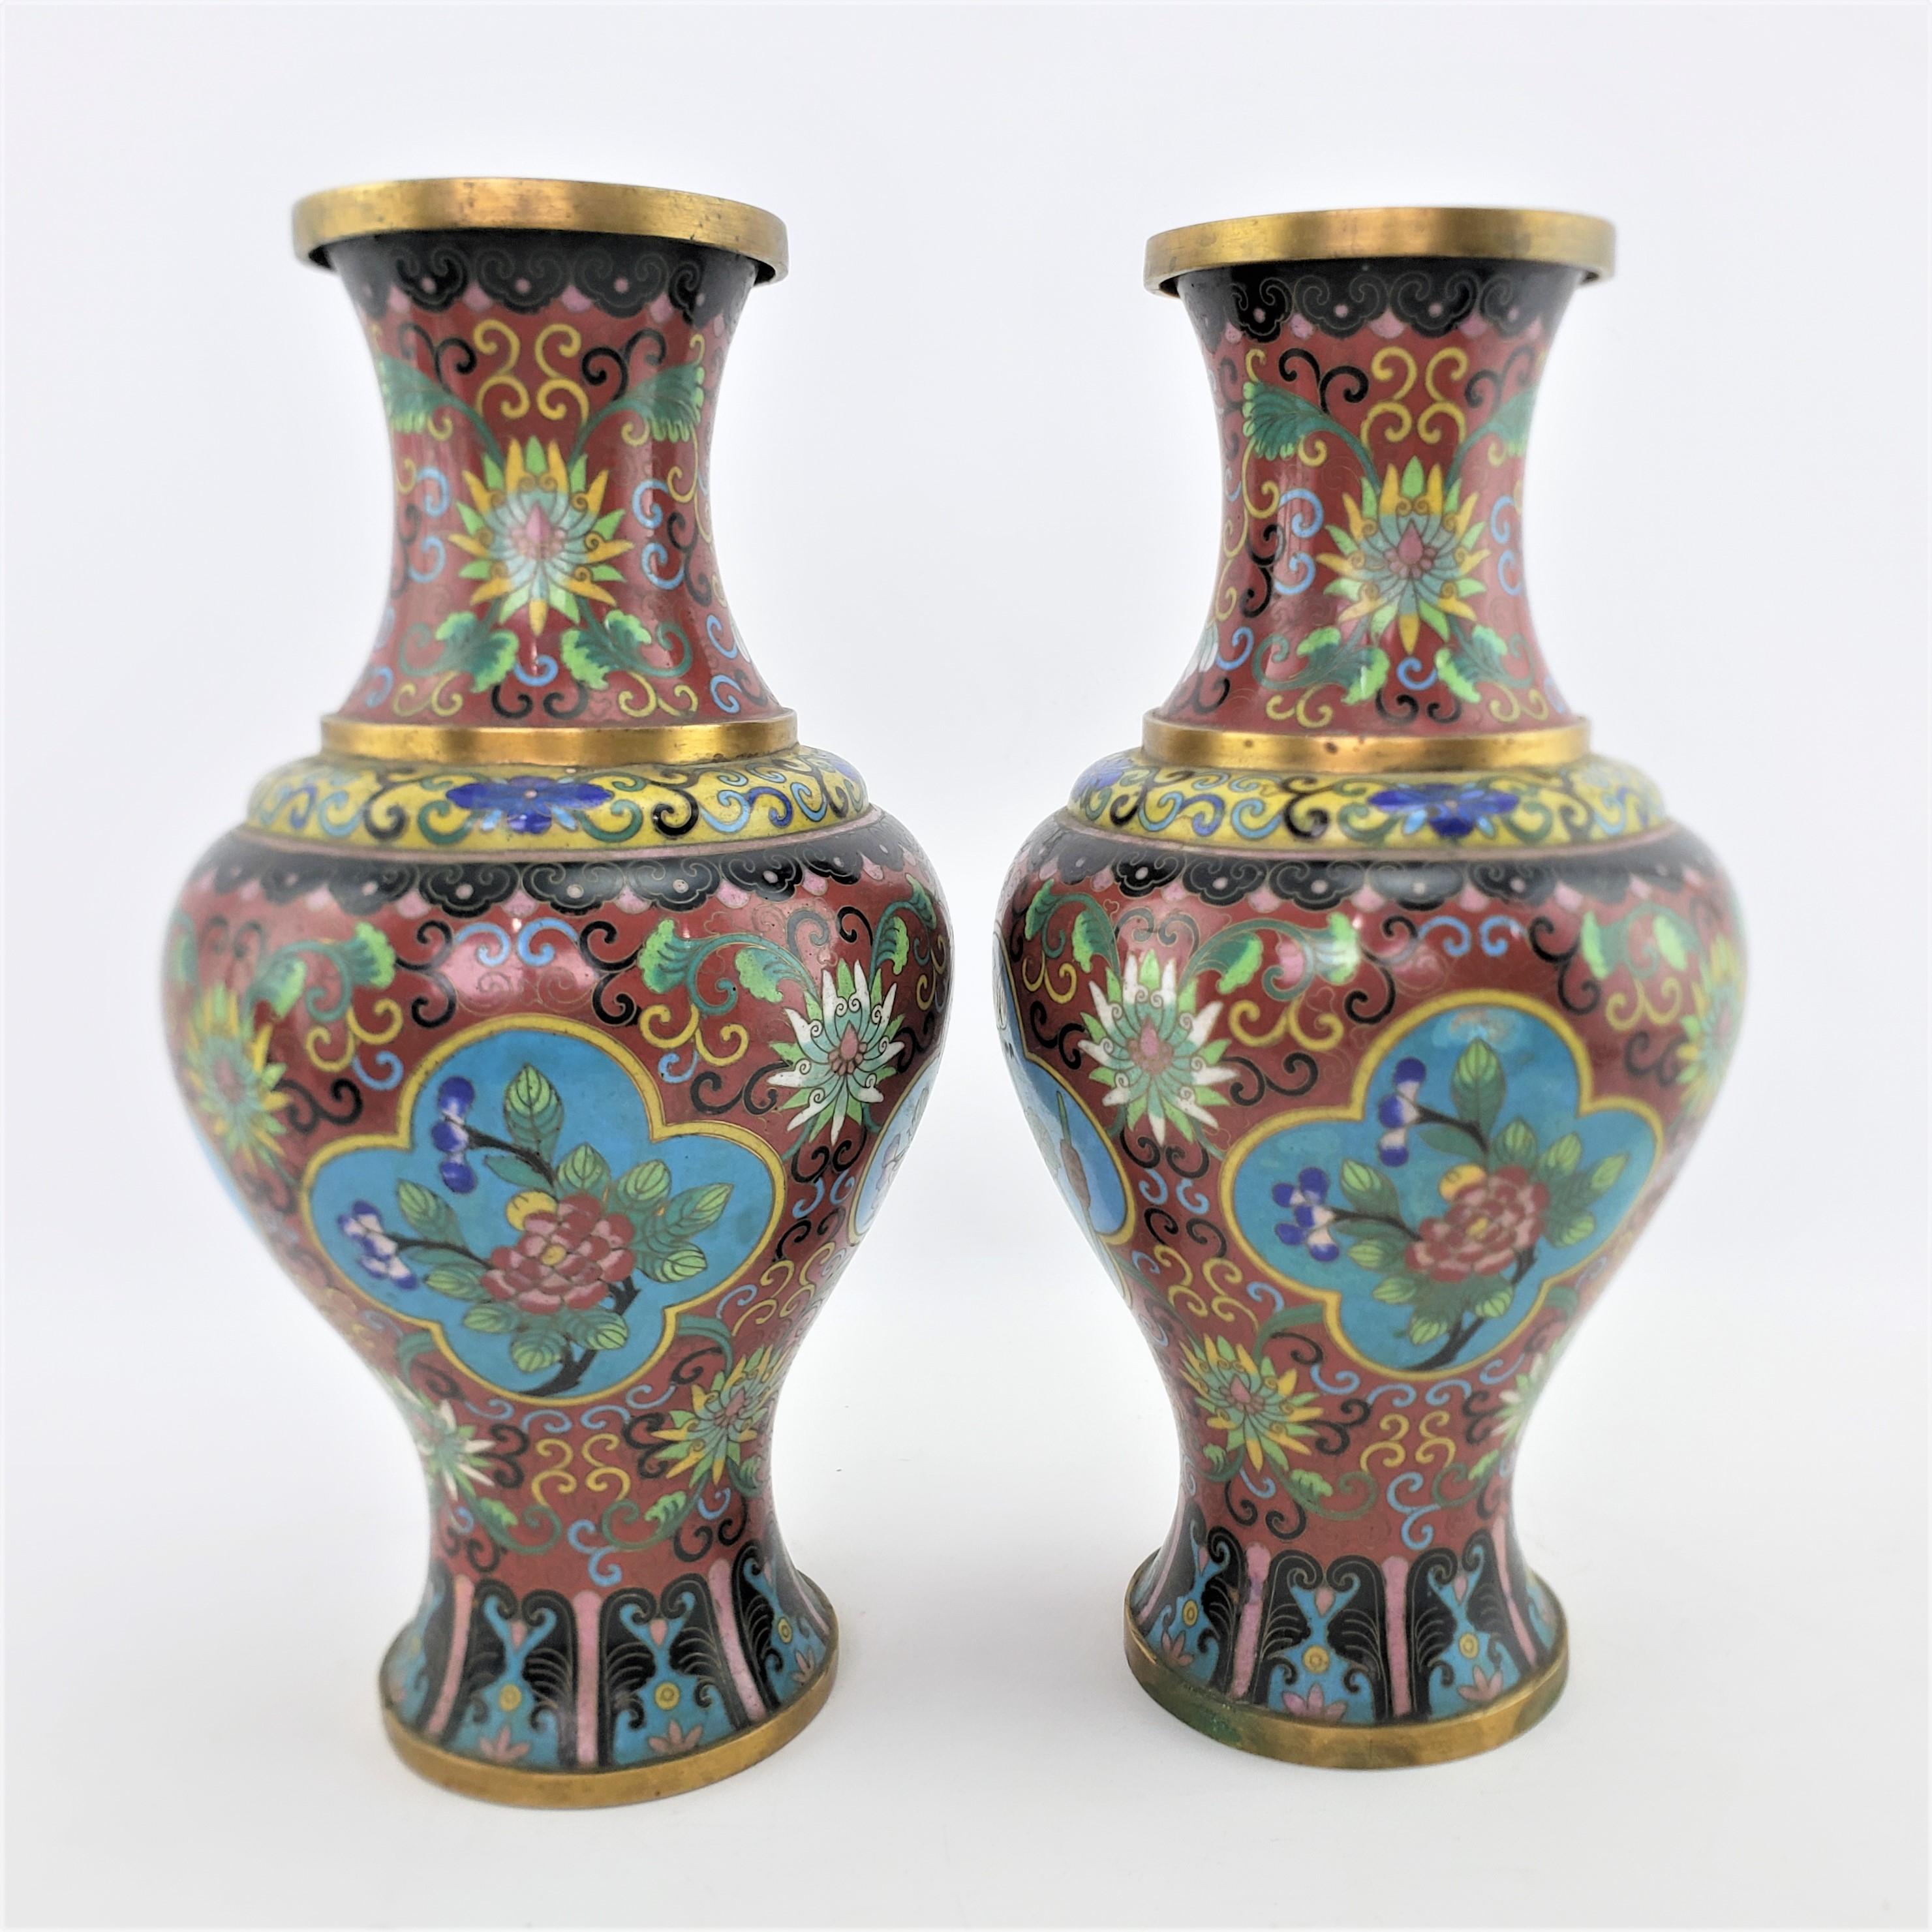 Pair of Early Chinese Republic Era Cloisonne Vases with Stylized Floral Motif For Sale 1